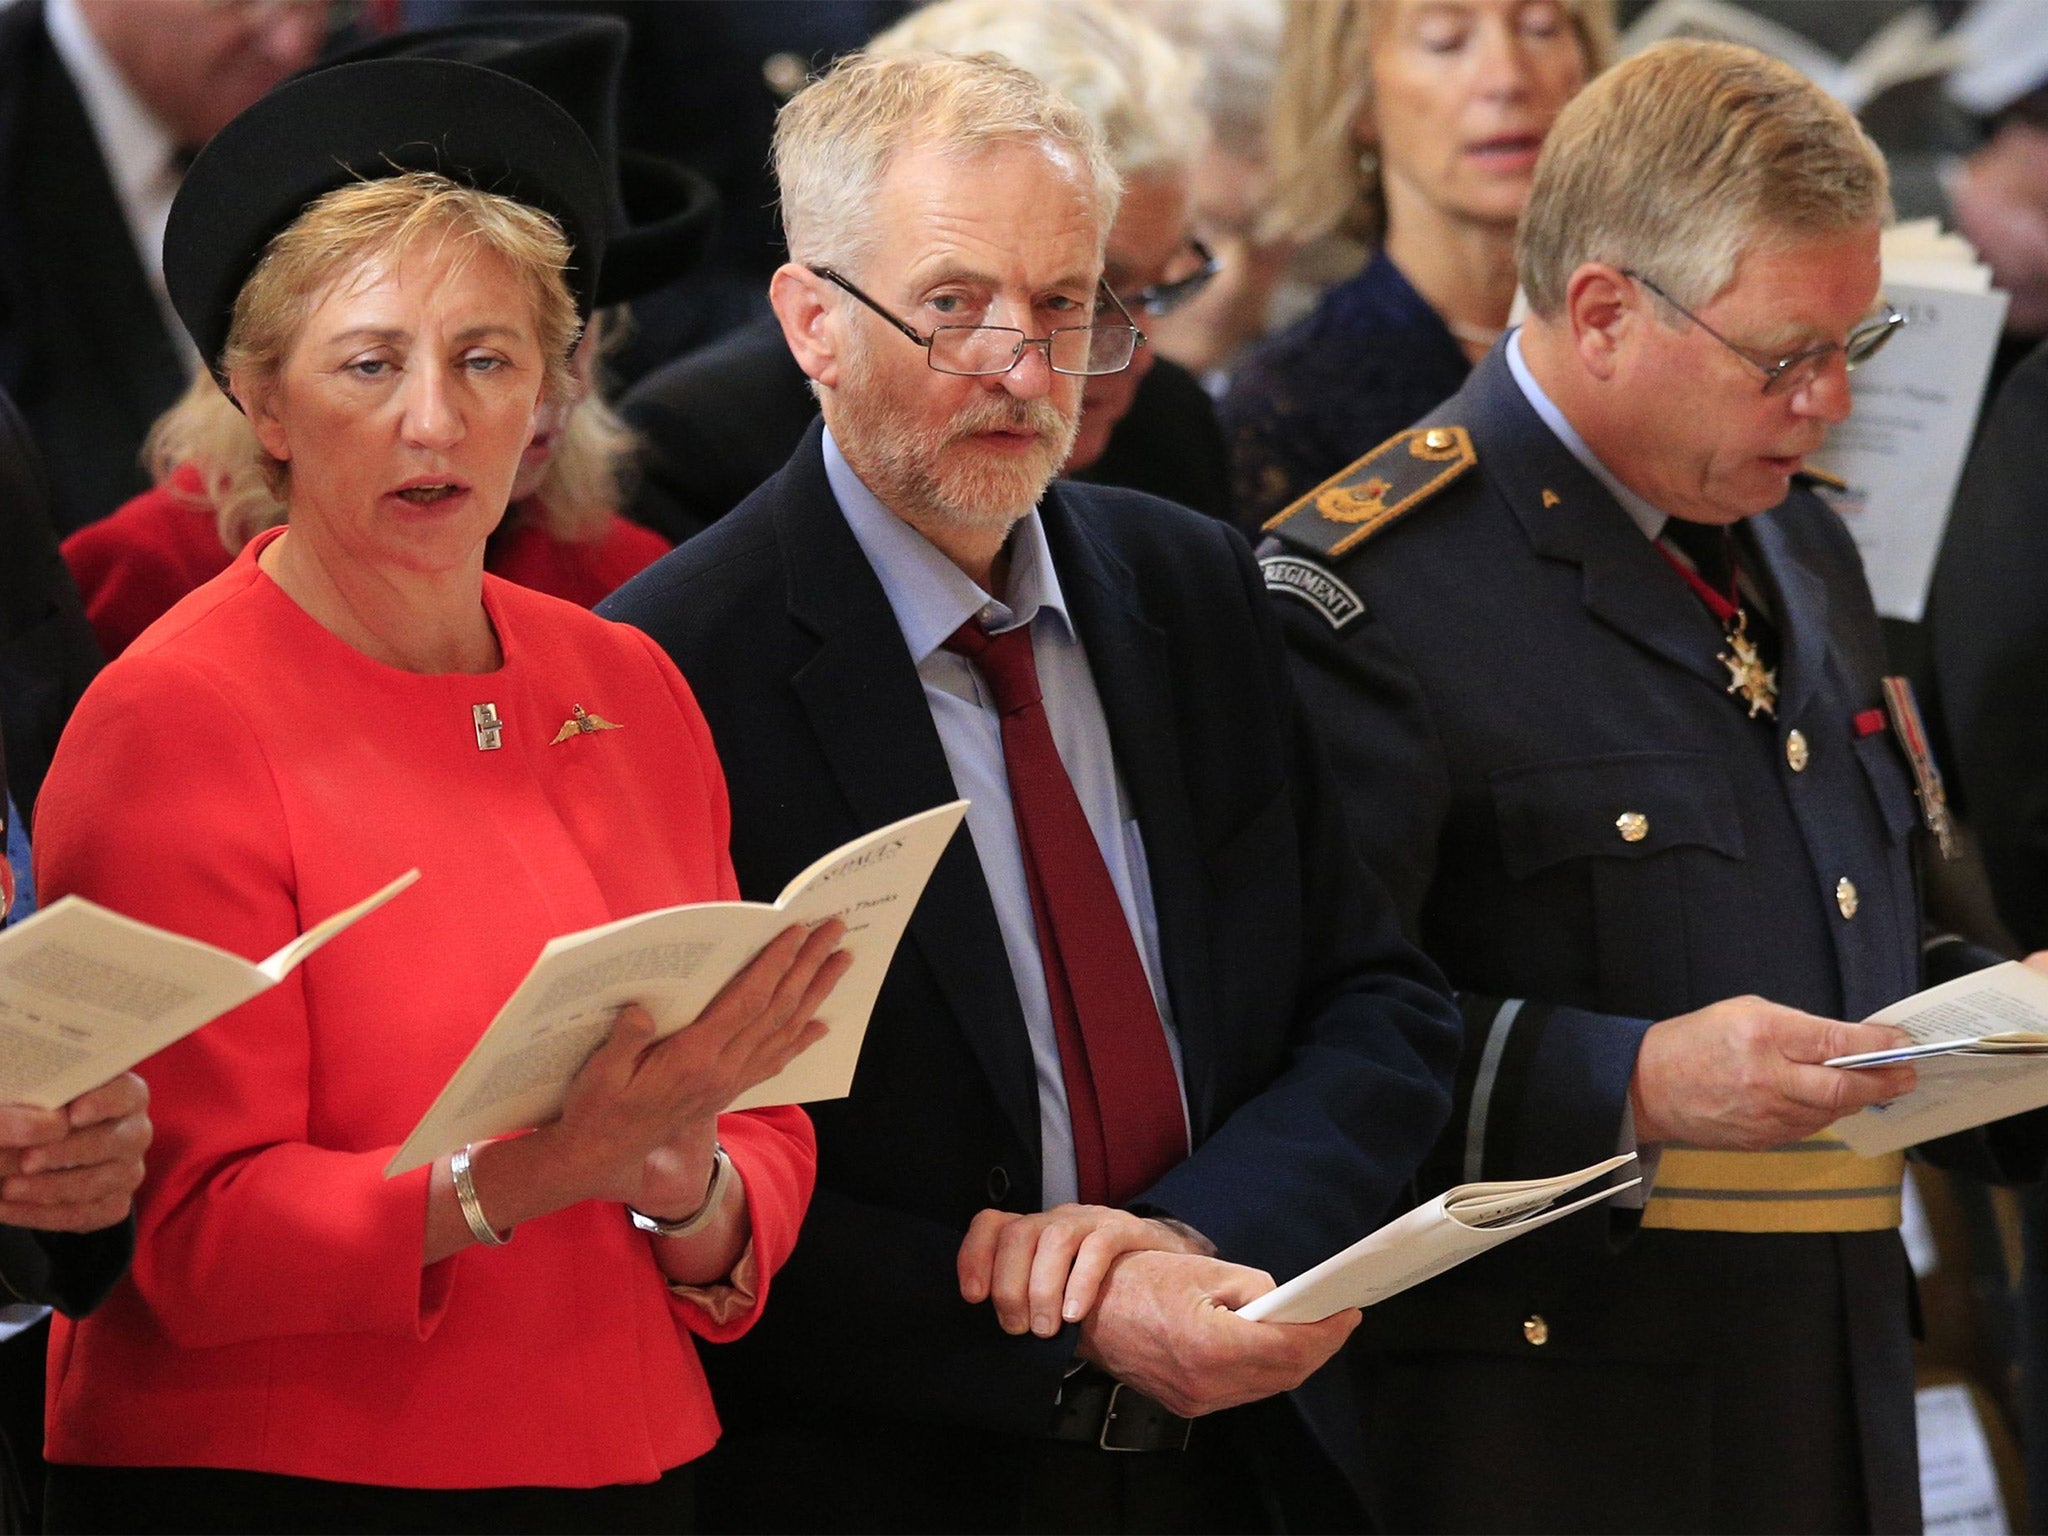 Jeremy Corbyn attends the Battle of Britain 75th anniversary service at St Paul’s Cathedral on Tuesday